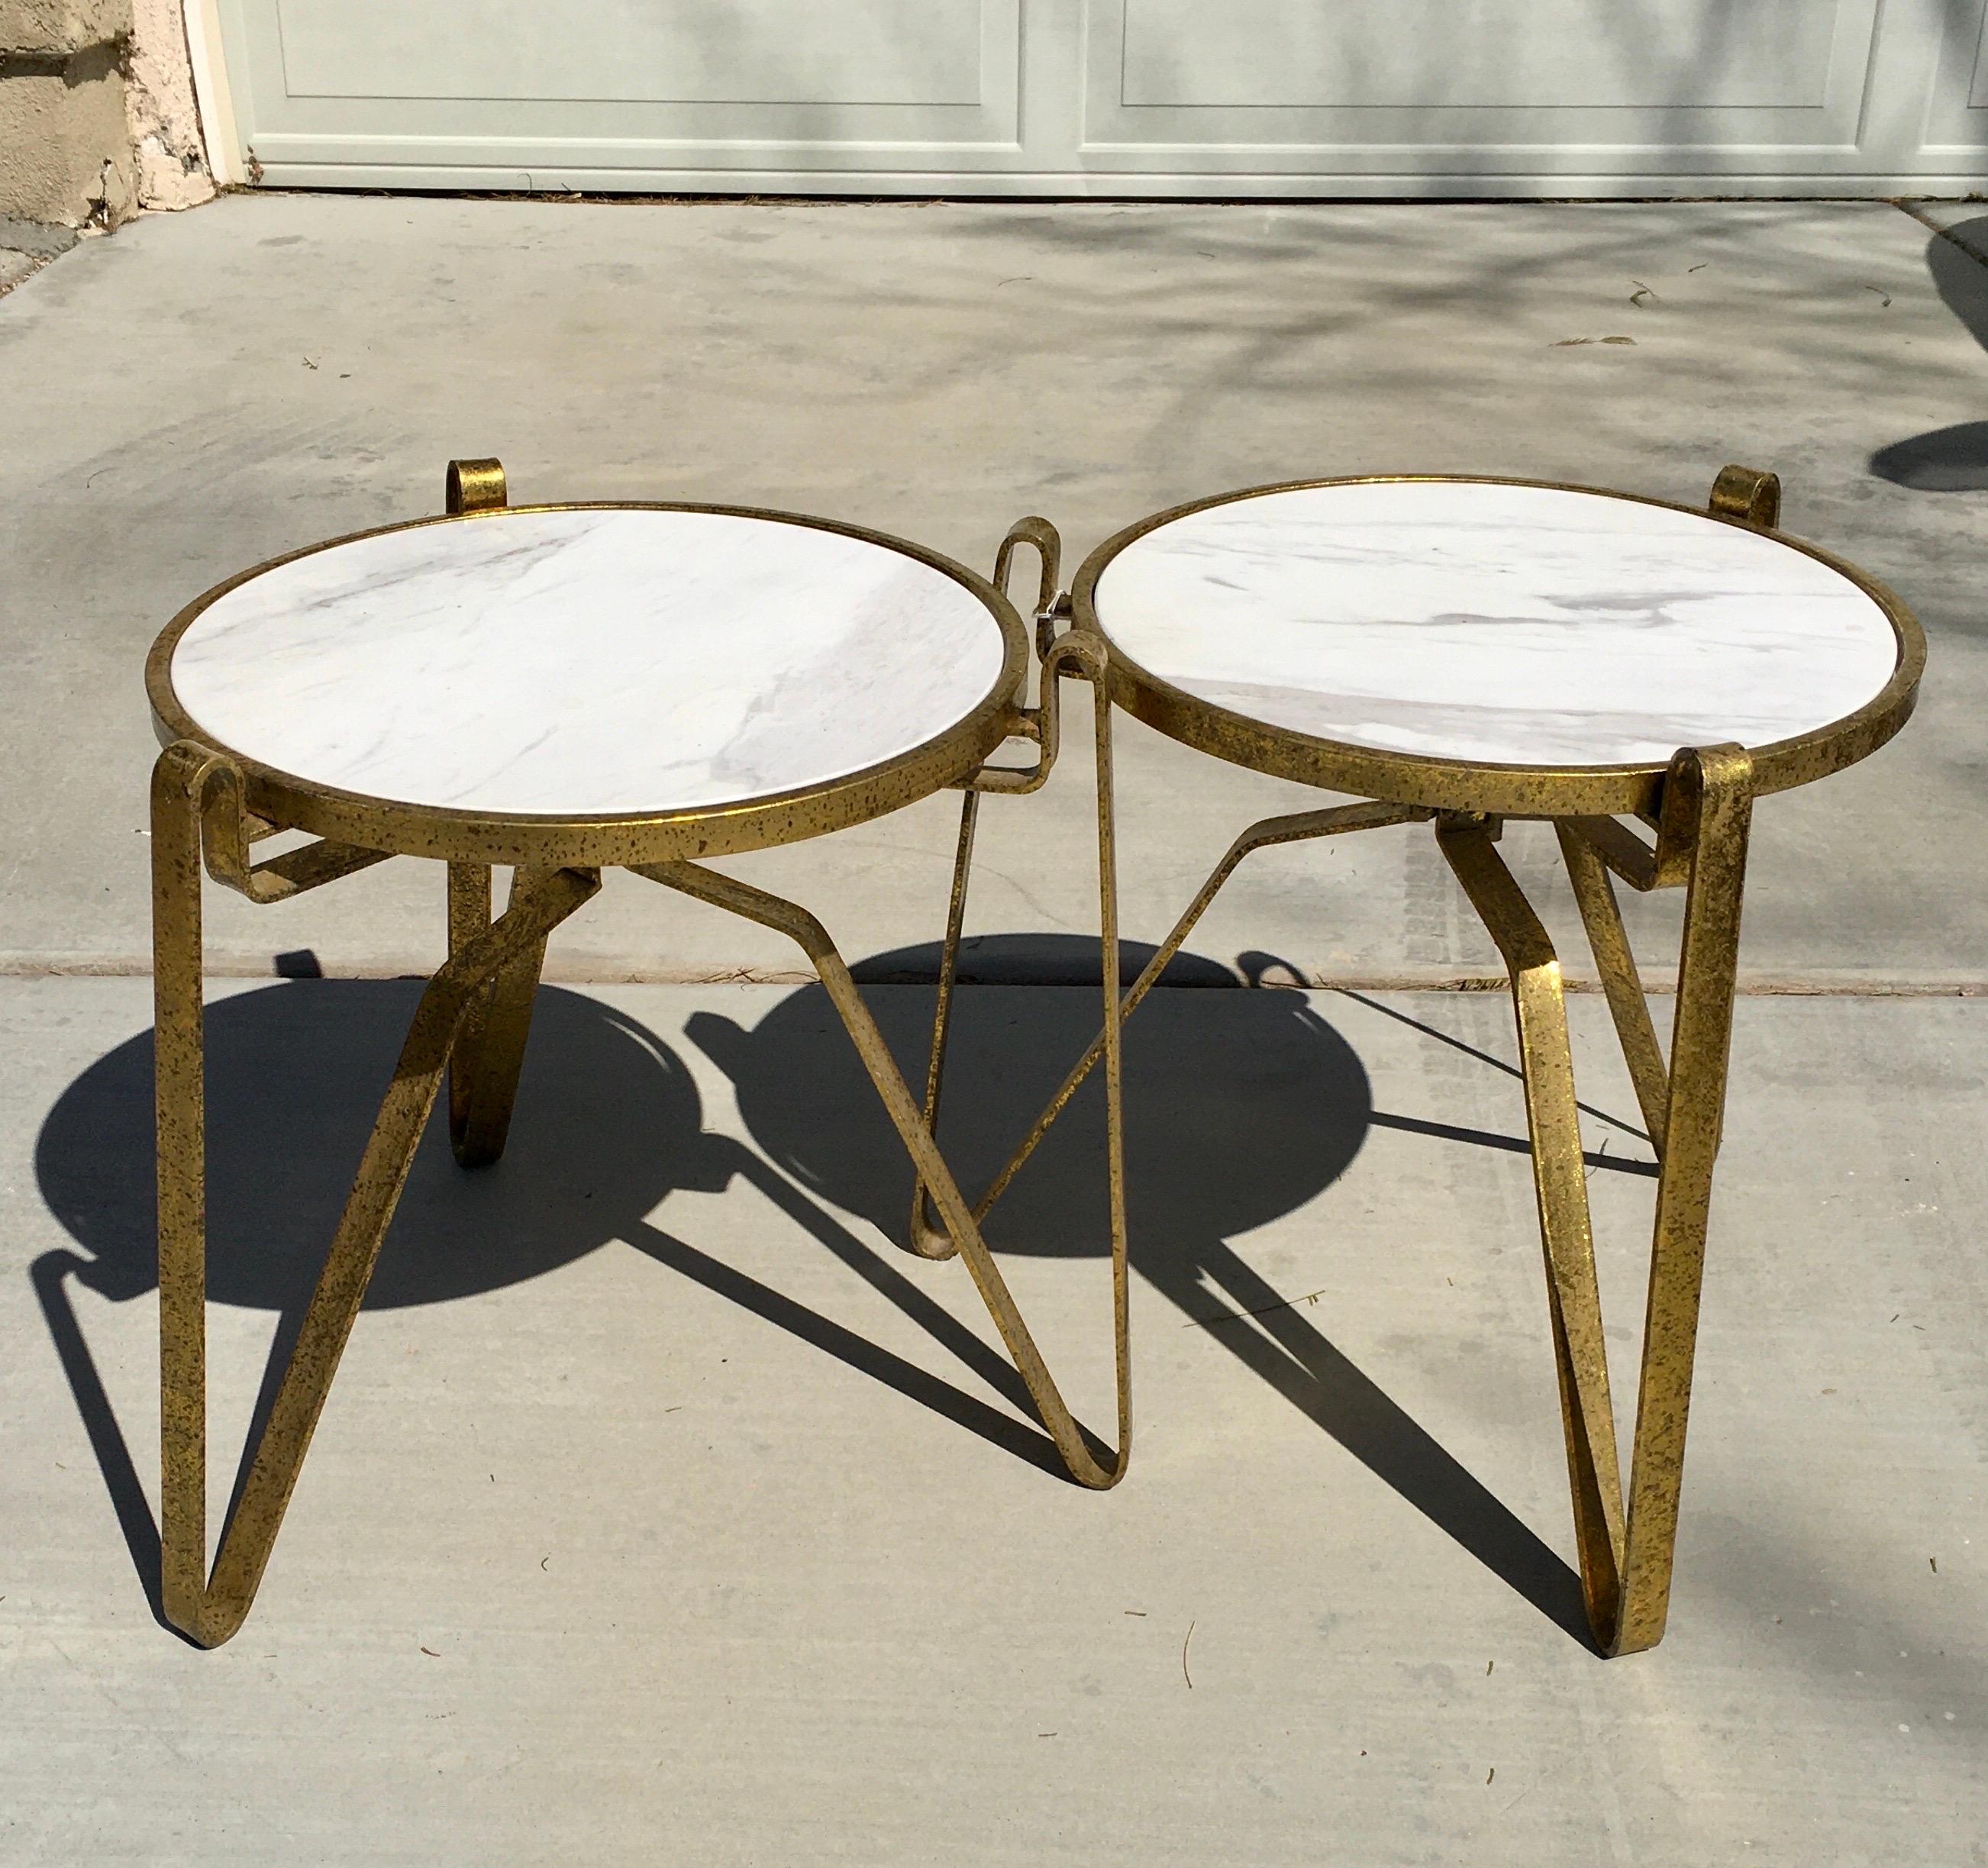 Hand-Crafted Pair of Italian Modernist Style Marble and Gold Leaf Metal Side Tables